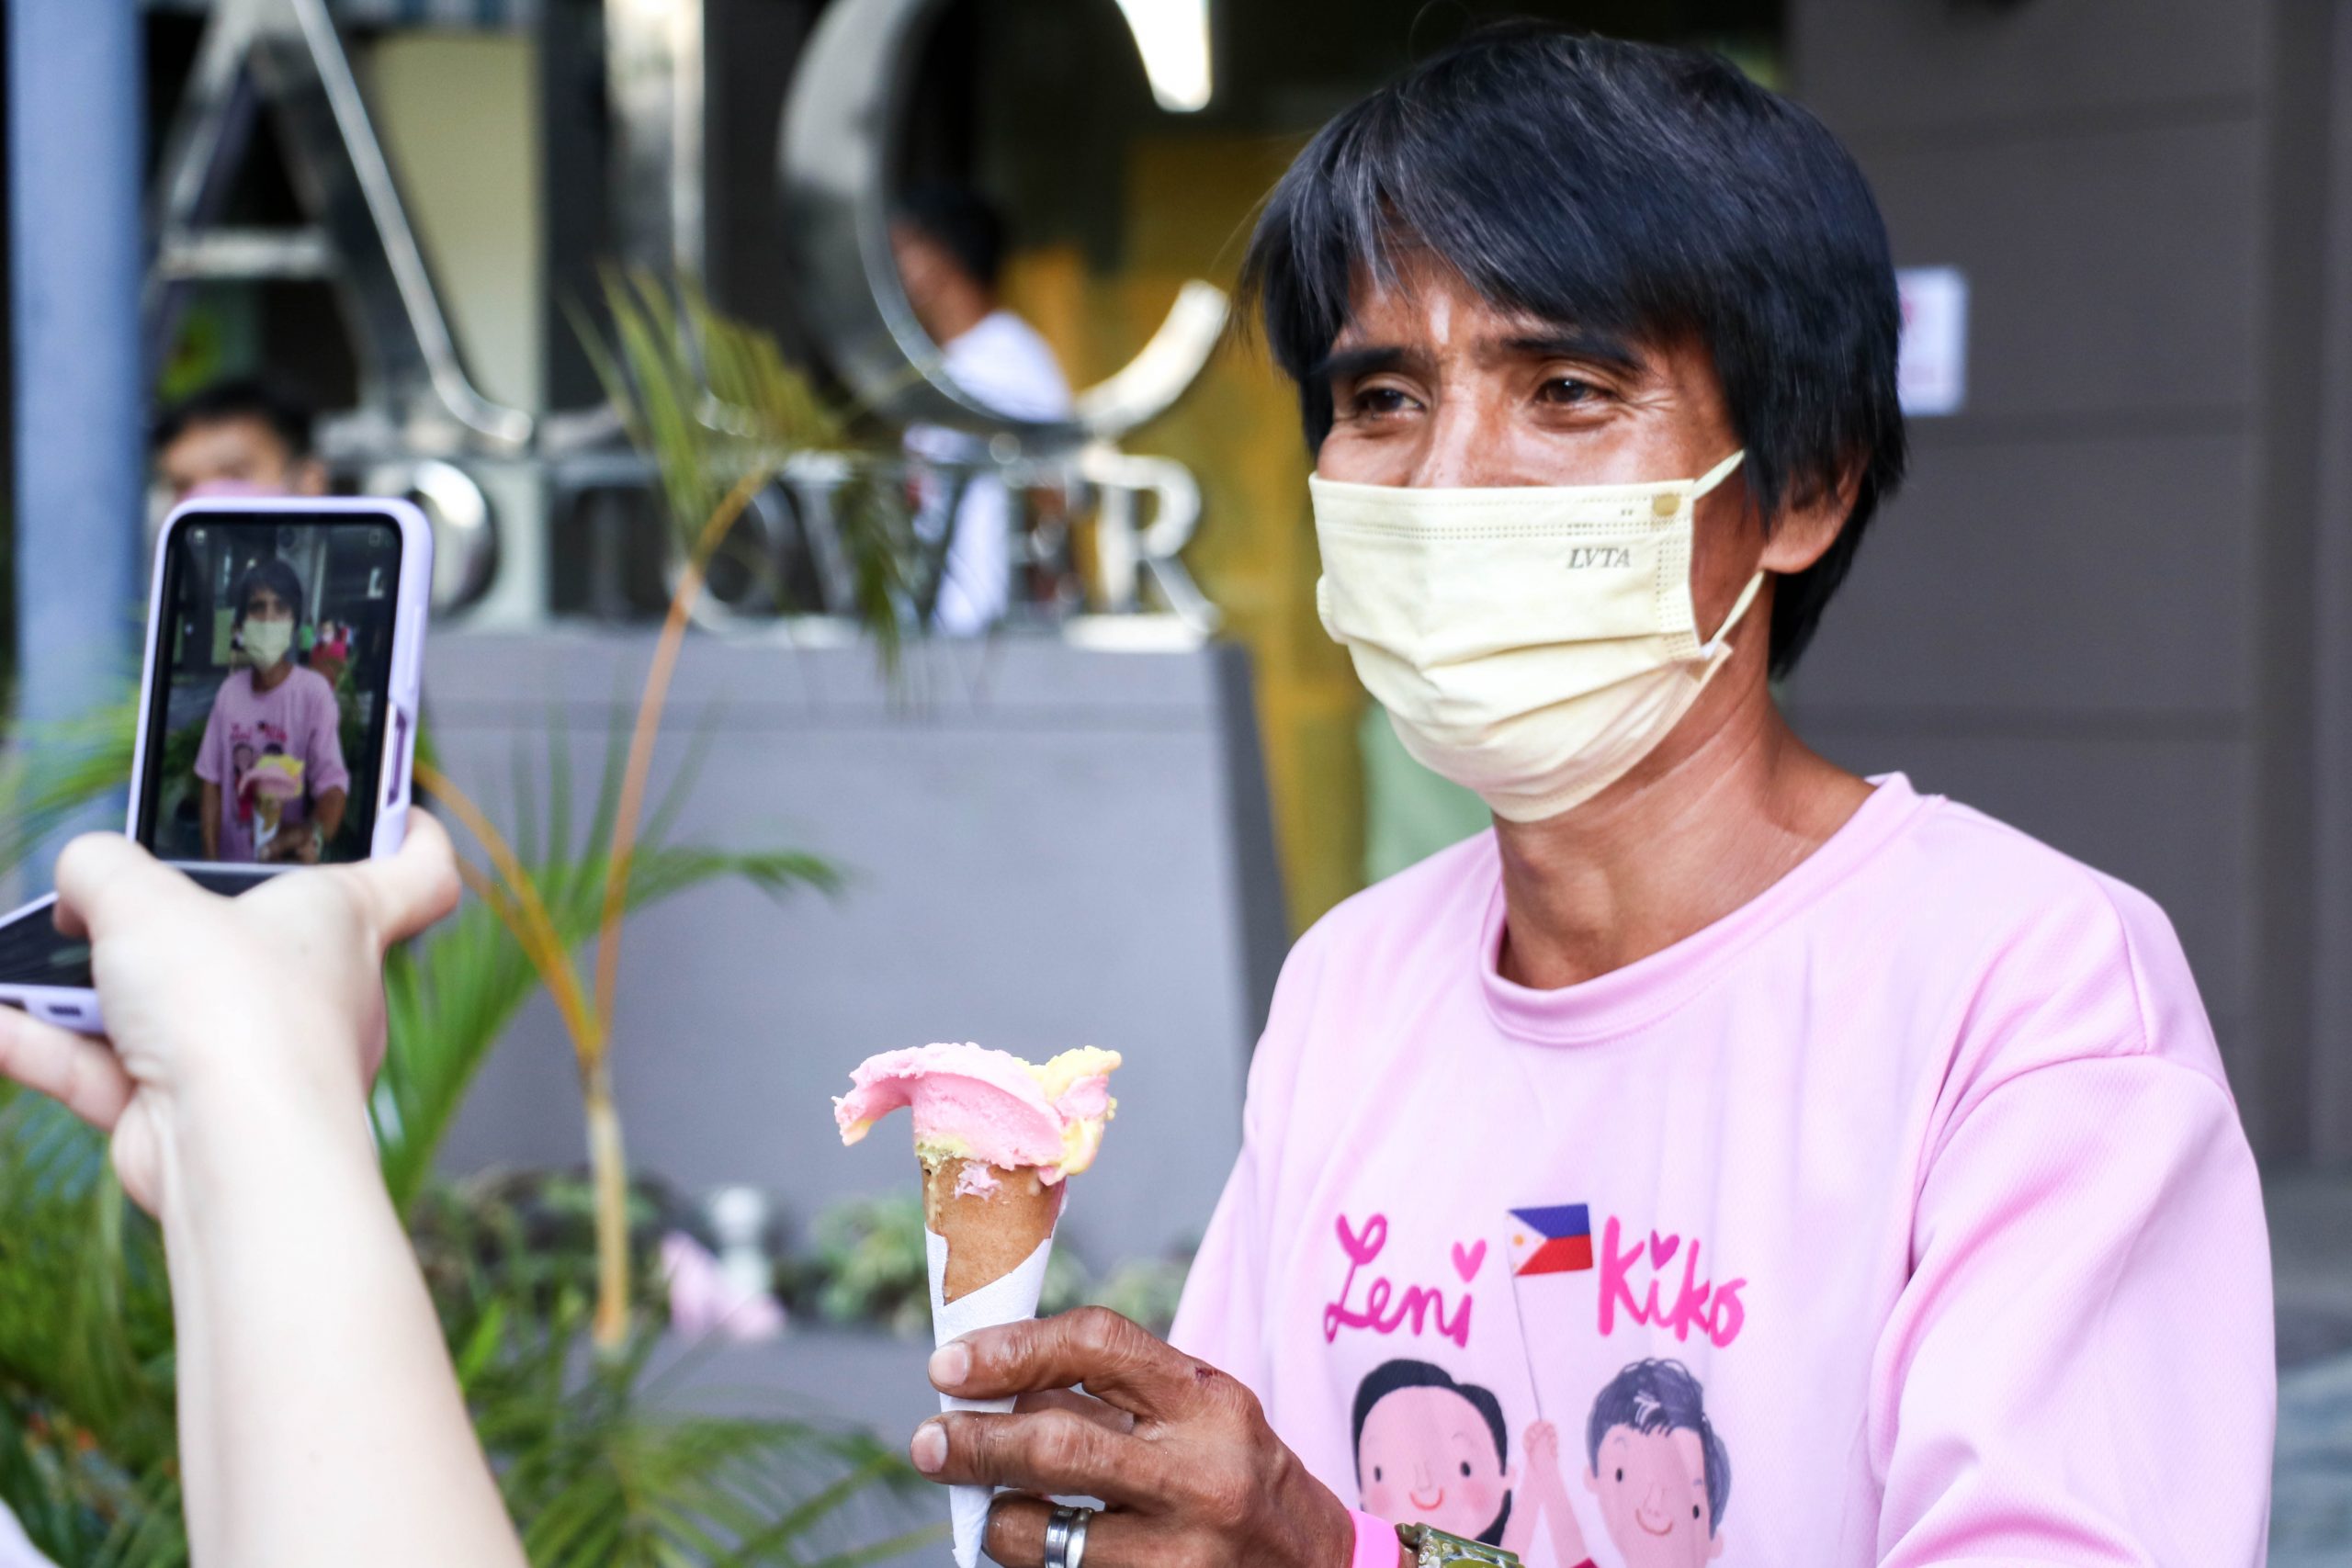 Some Leni-Kiko supporters take photos with ice cream vendors, sharing on social media that #PasigIsPink.